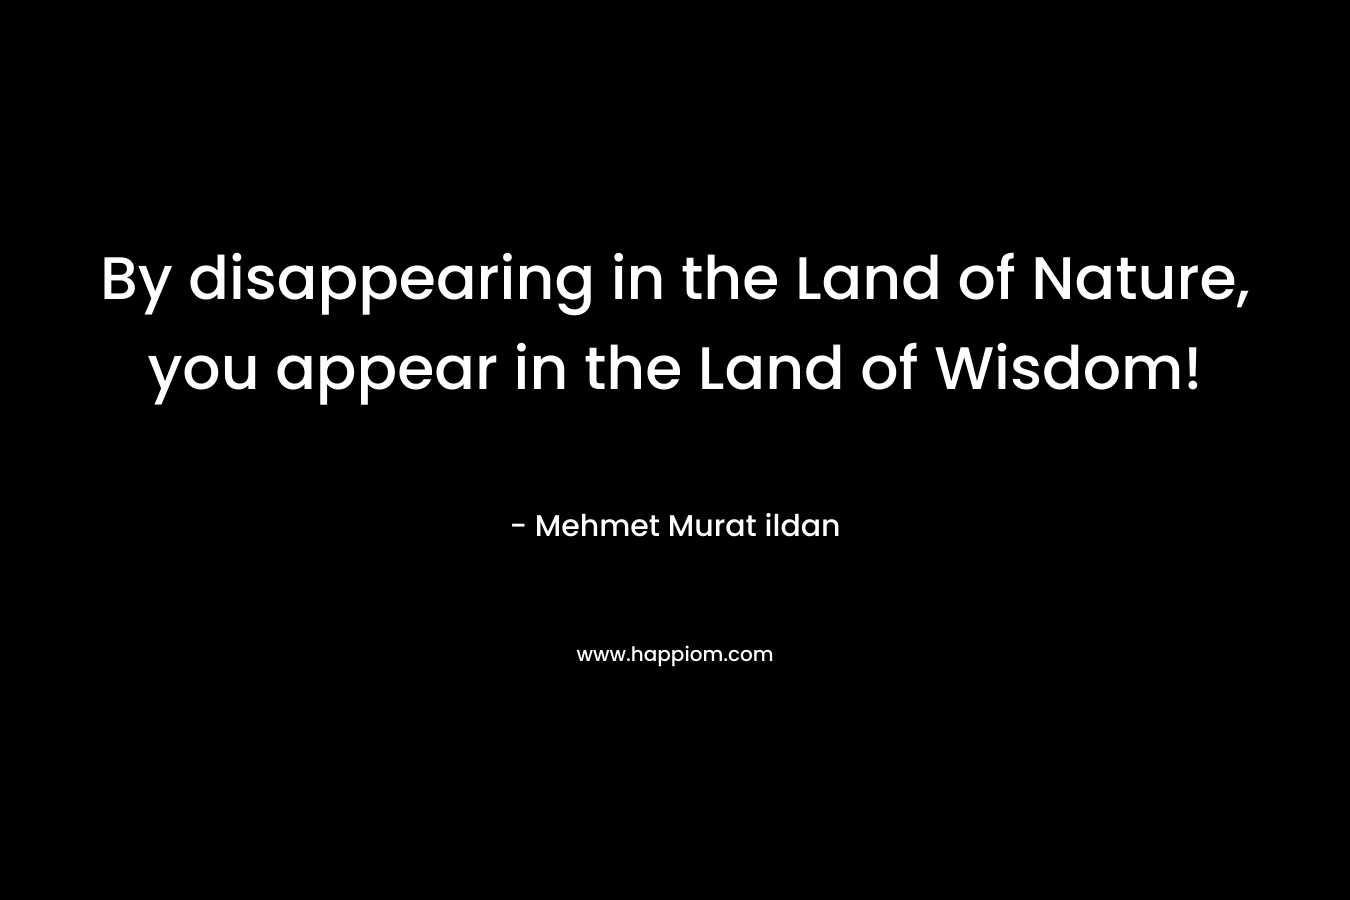 By disappearing in the Land of Nature, you appear in the Land of Wisdom! – Mehmet Murat ildan